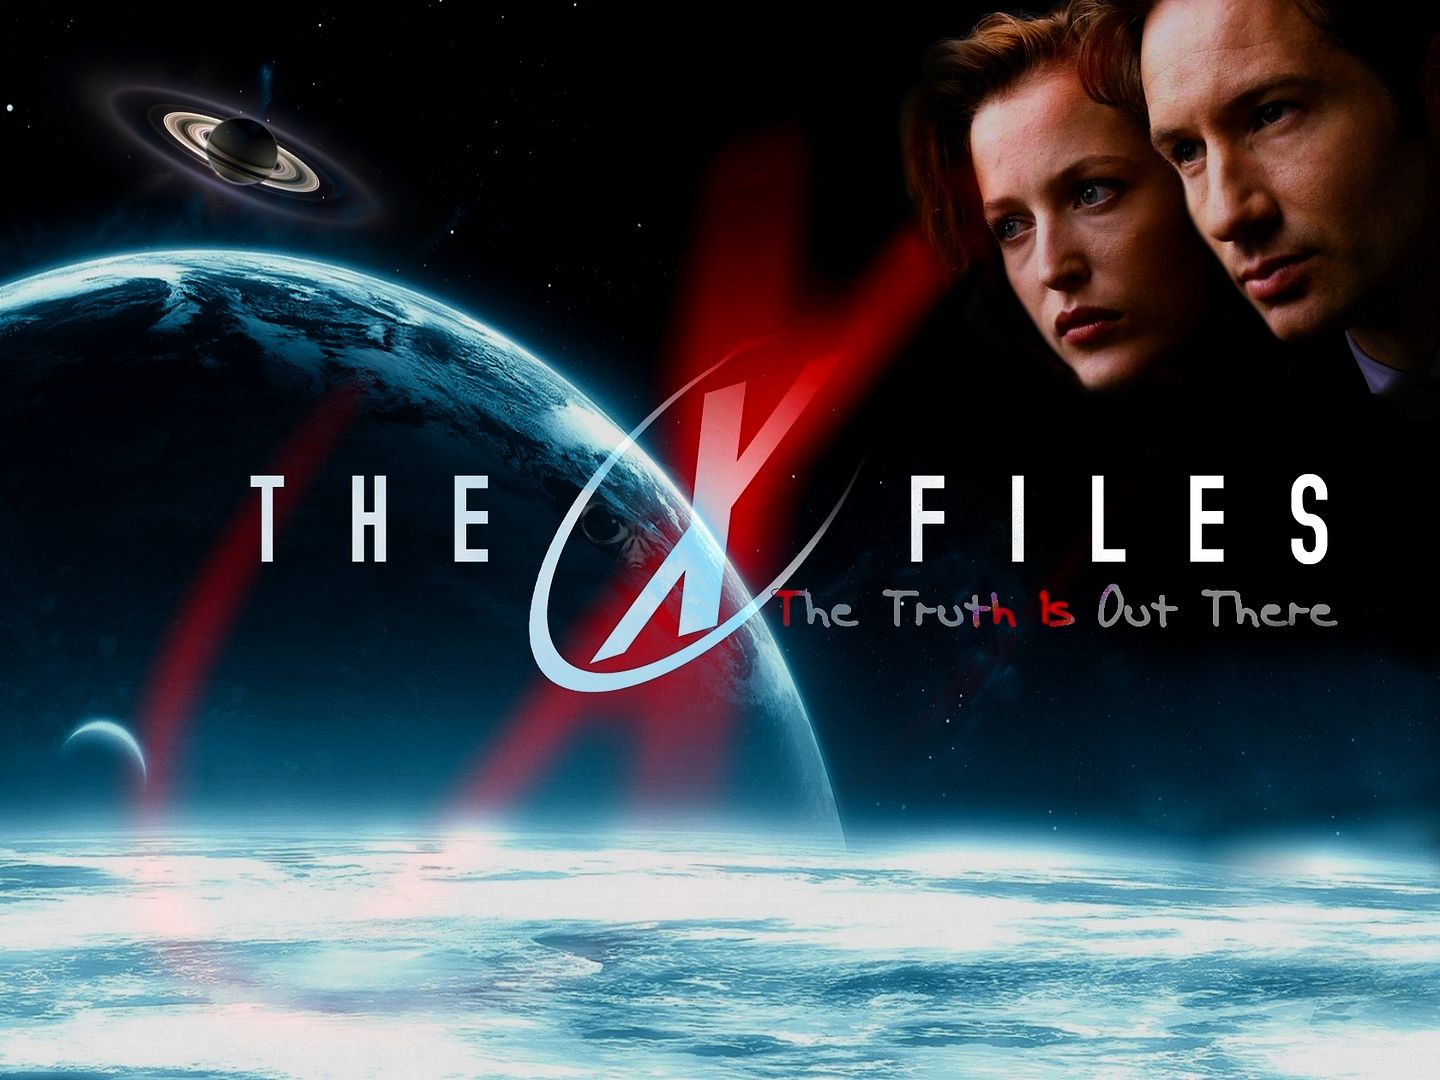 x_files_the_truth_is_out_there_by_rayalexwebsite-d49upzz_zpsa9f0faba.jpg